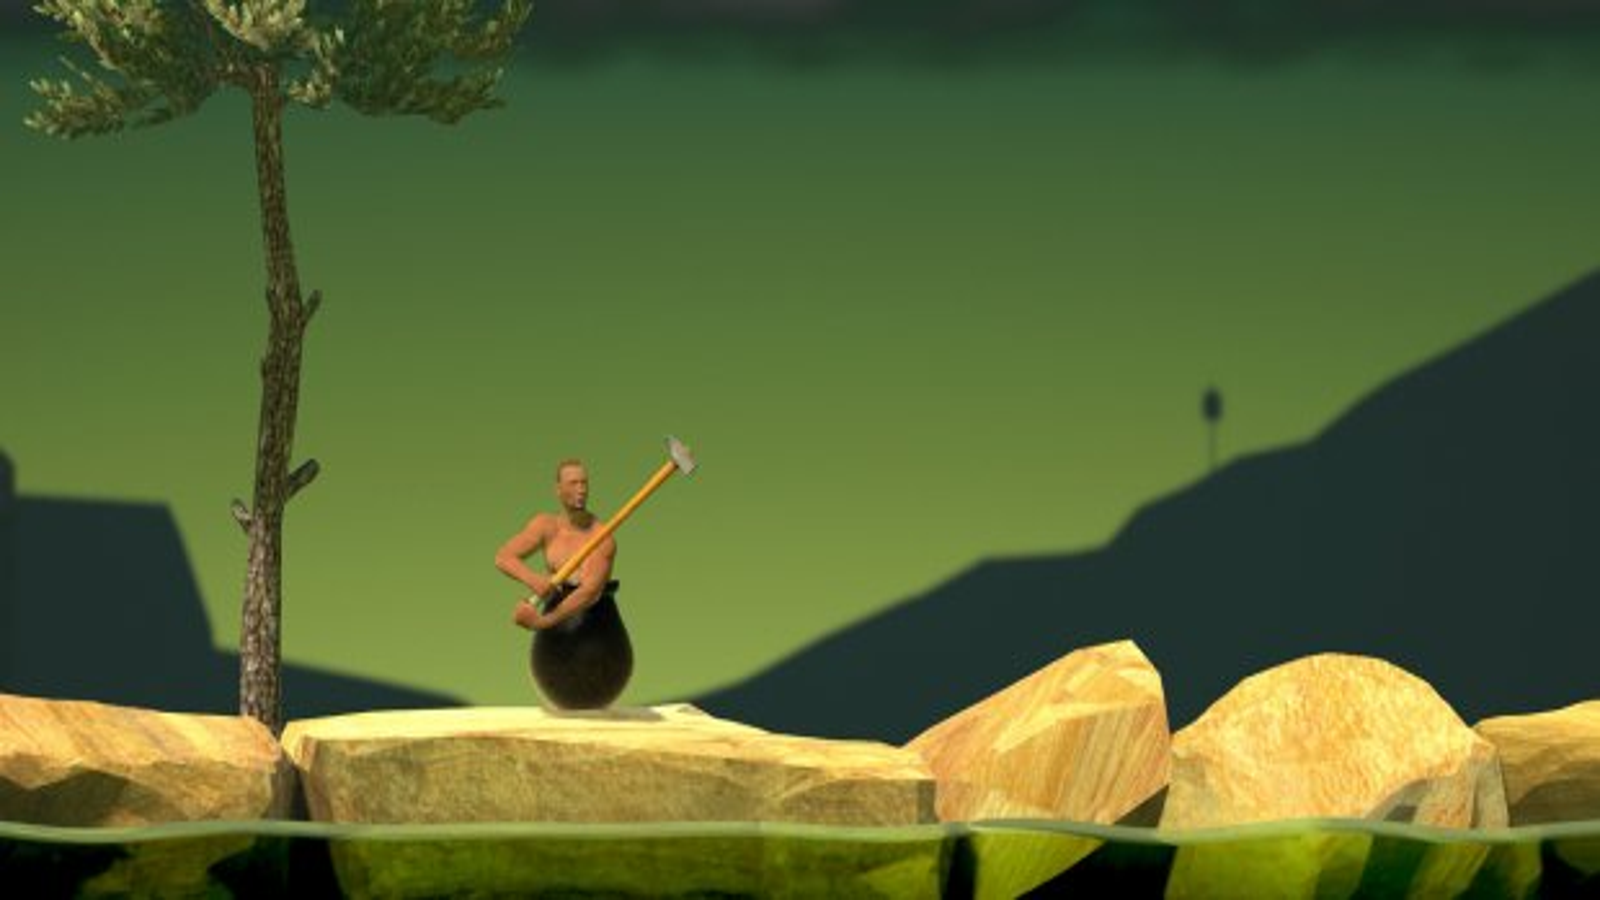 Getting Over It beaten in 2 minutes